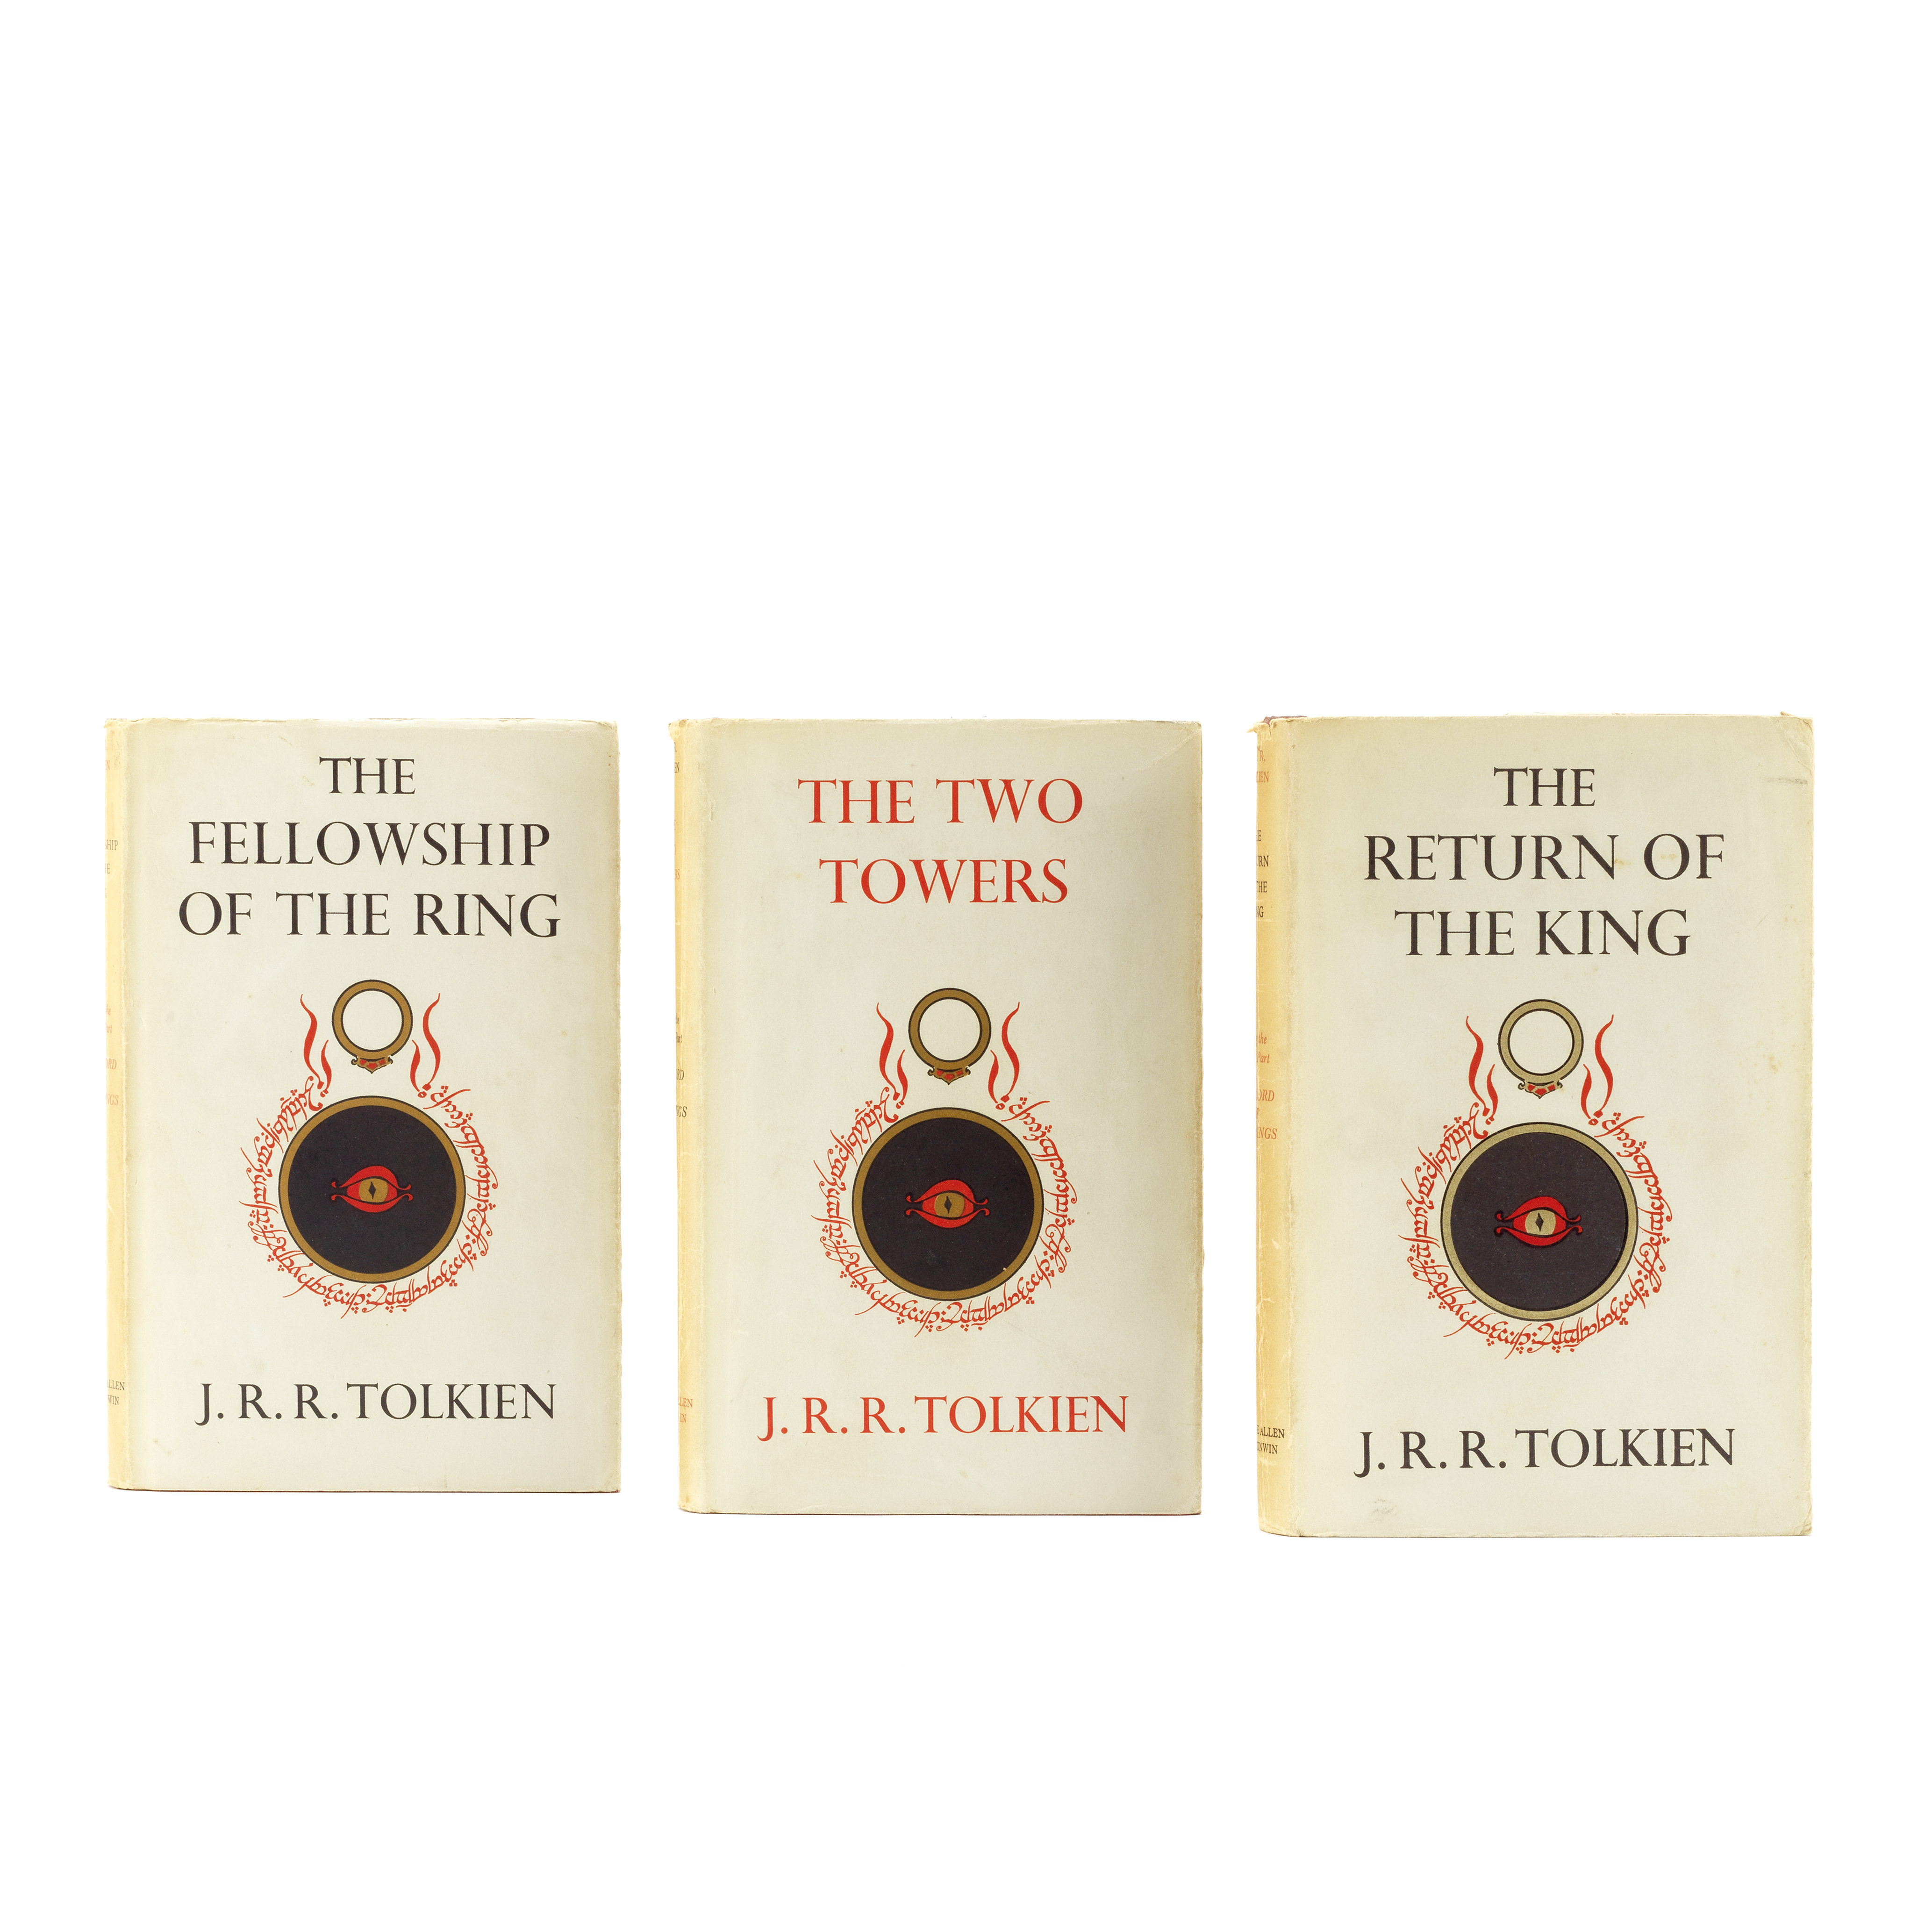 TOLKIEN (J.R.R.) [The Lord of the Rings:] The Fellowship of the Ring; The Two Towers; The Return...